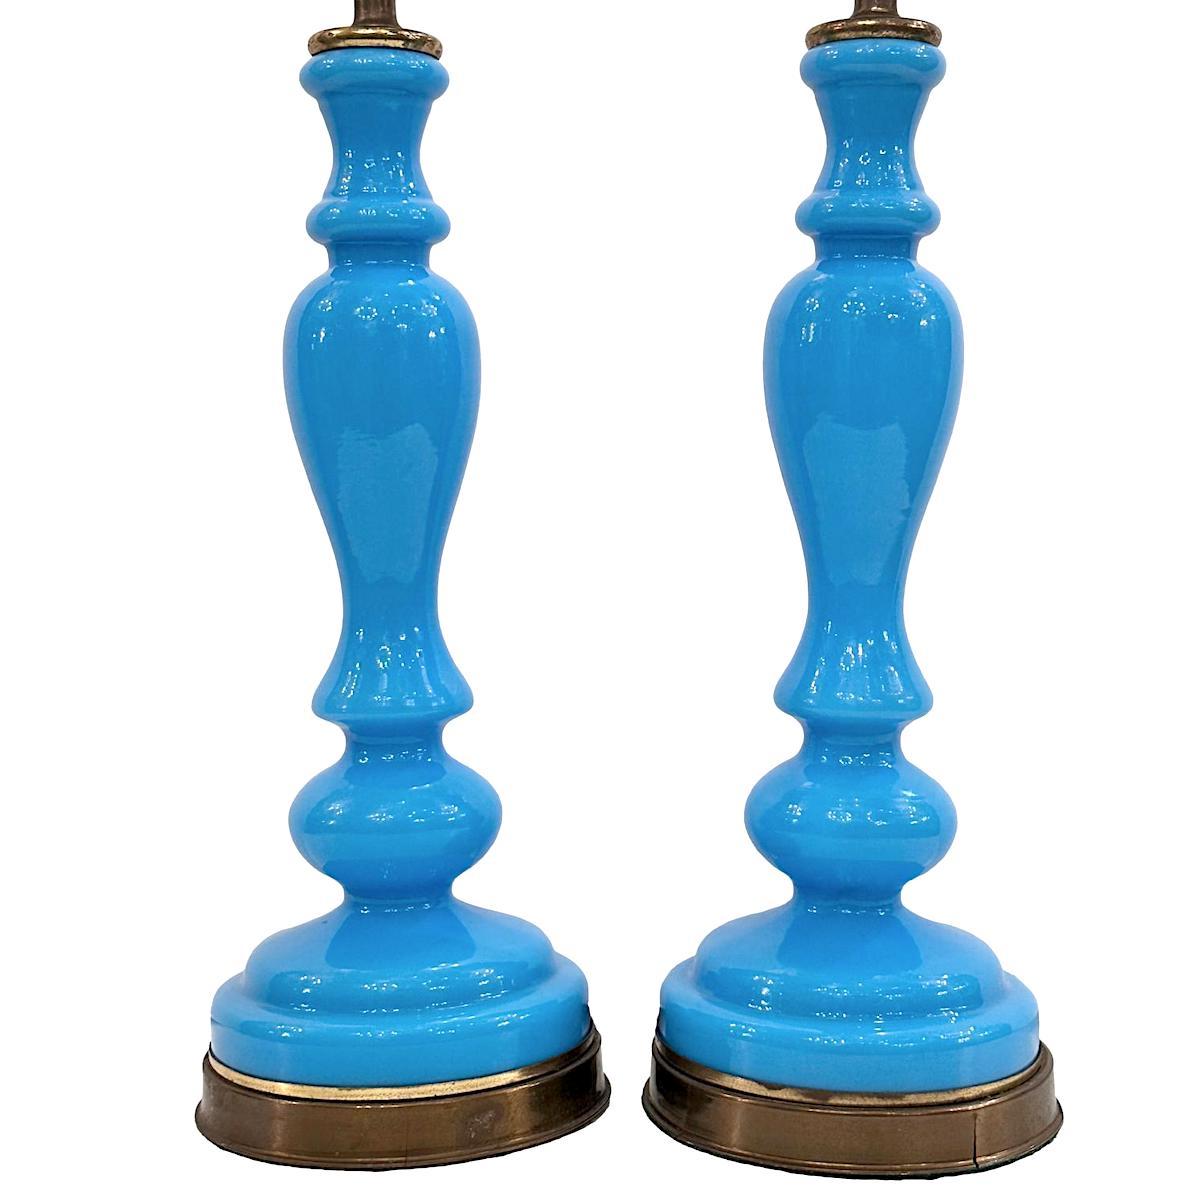 Pair of circa 1920's French blue opaline glass table lamps.

Measurements:
Height of body: 14